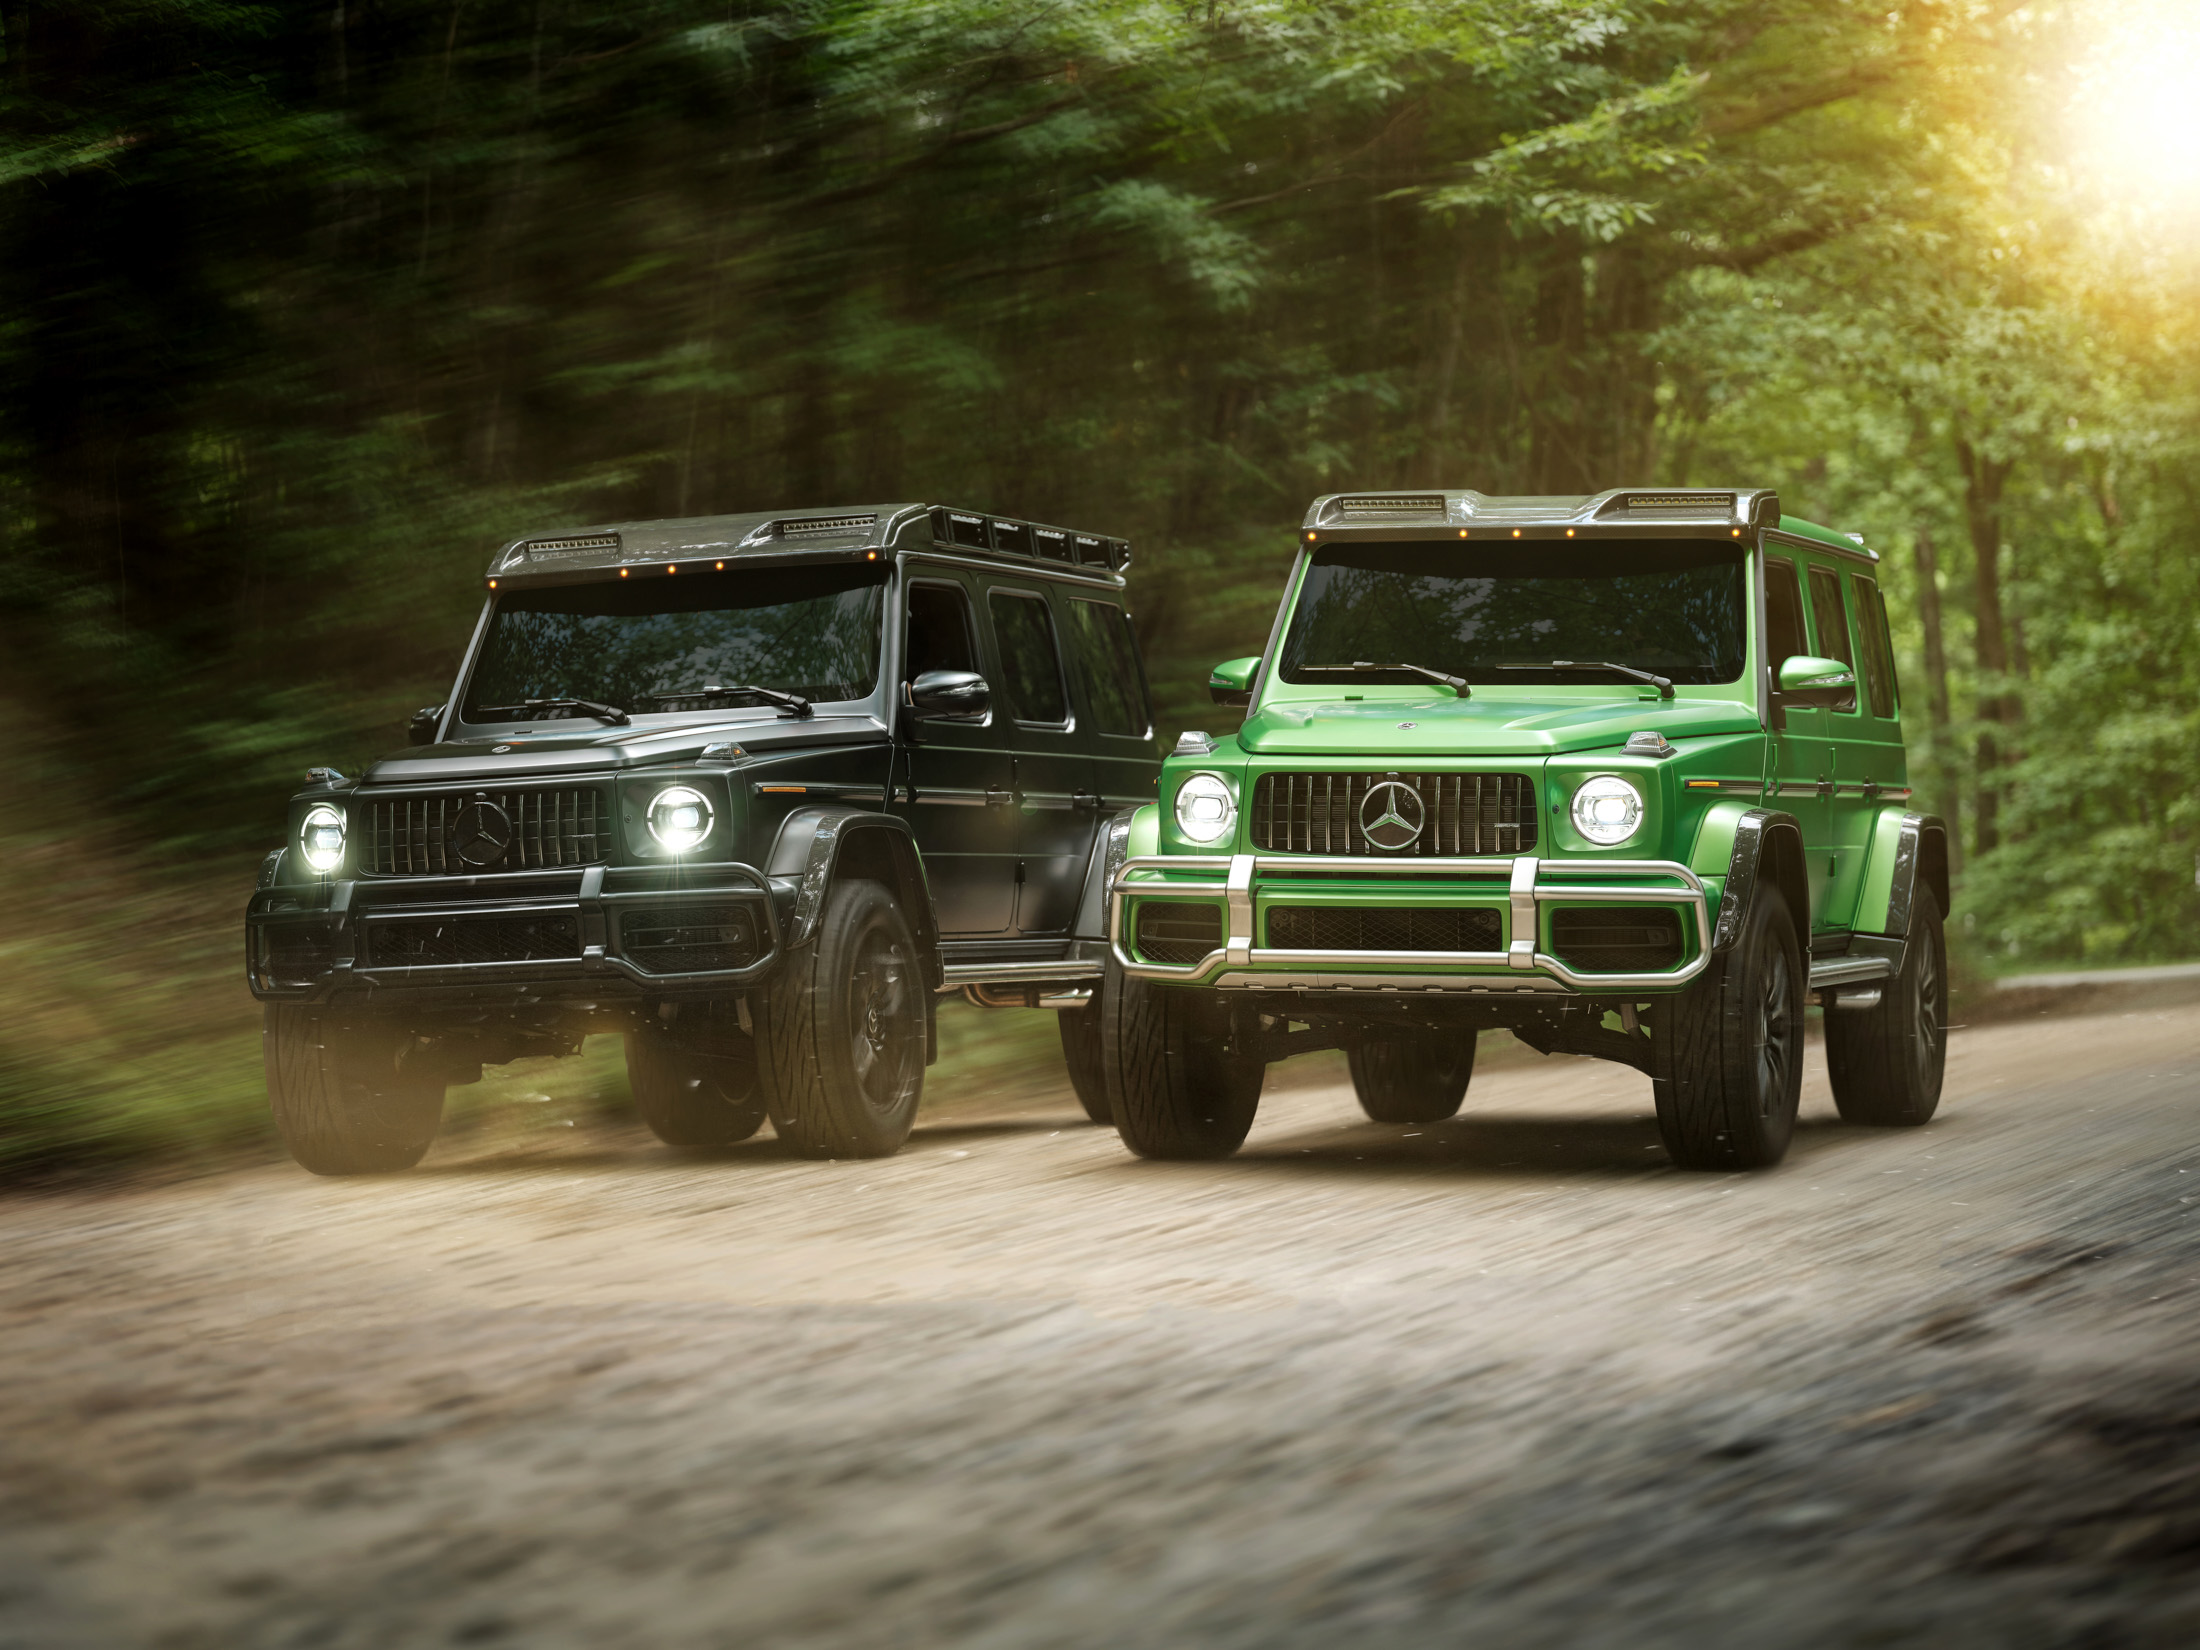 relates to The $350,000 Mercedes-AMG G63 4x4² Is an Unapologetic Joy Ride